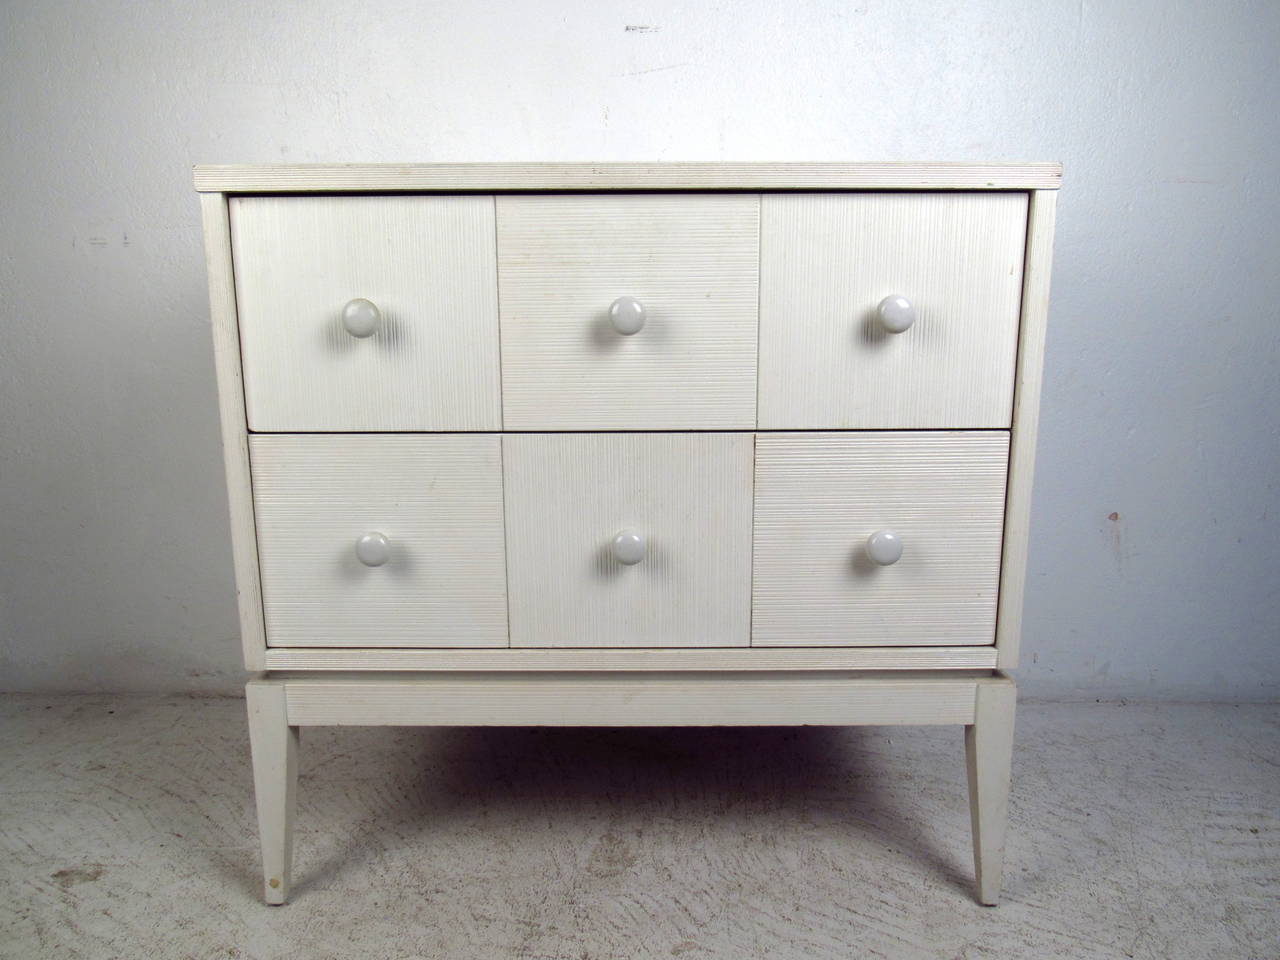 This mid century two drawer chest by Kroehler Furniture features a white textured finish, durable laminate top, and tapered legs which offer ample storage and a subtle modern accent to any home or office.

Please confirm item location (NY or NJ)